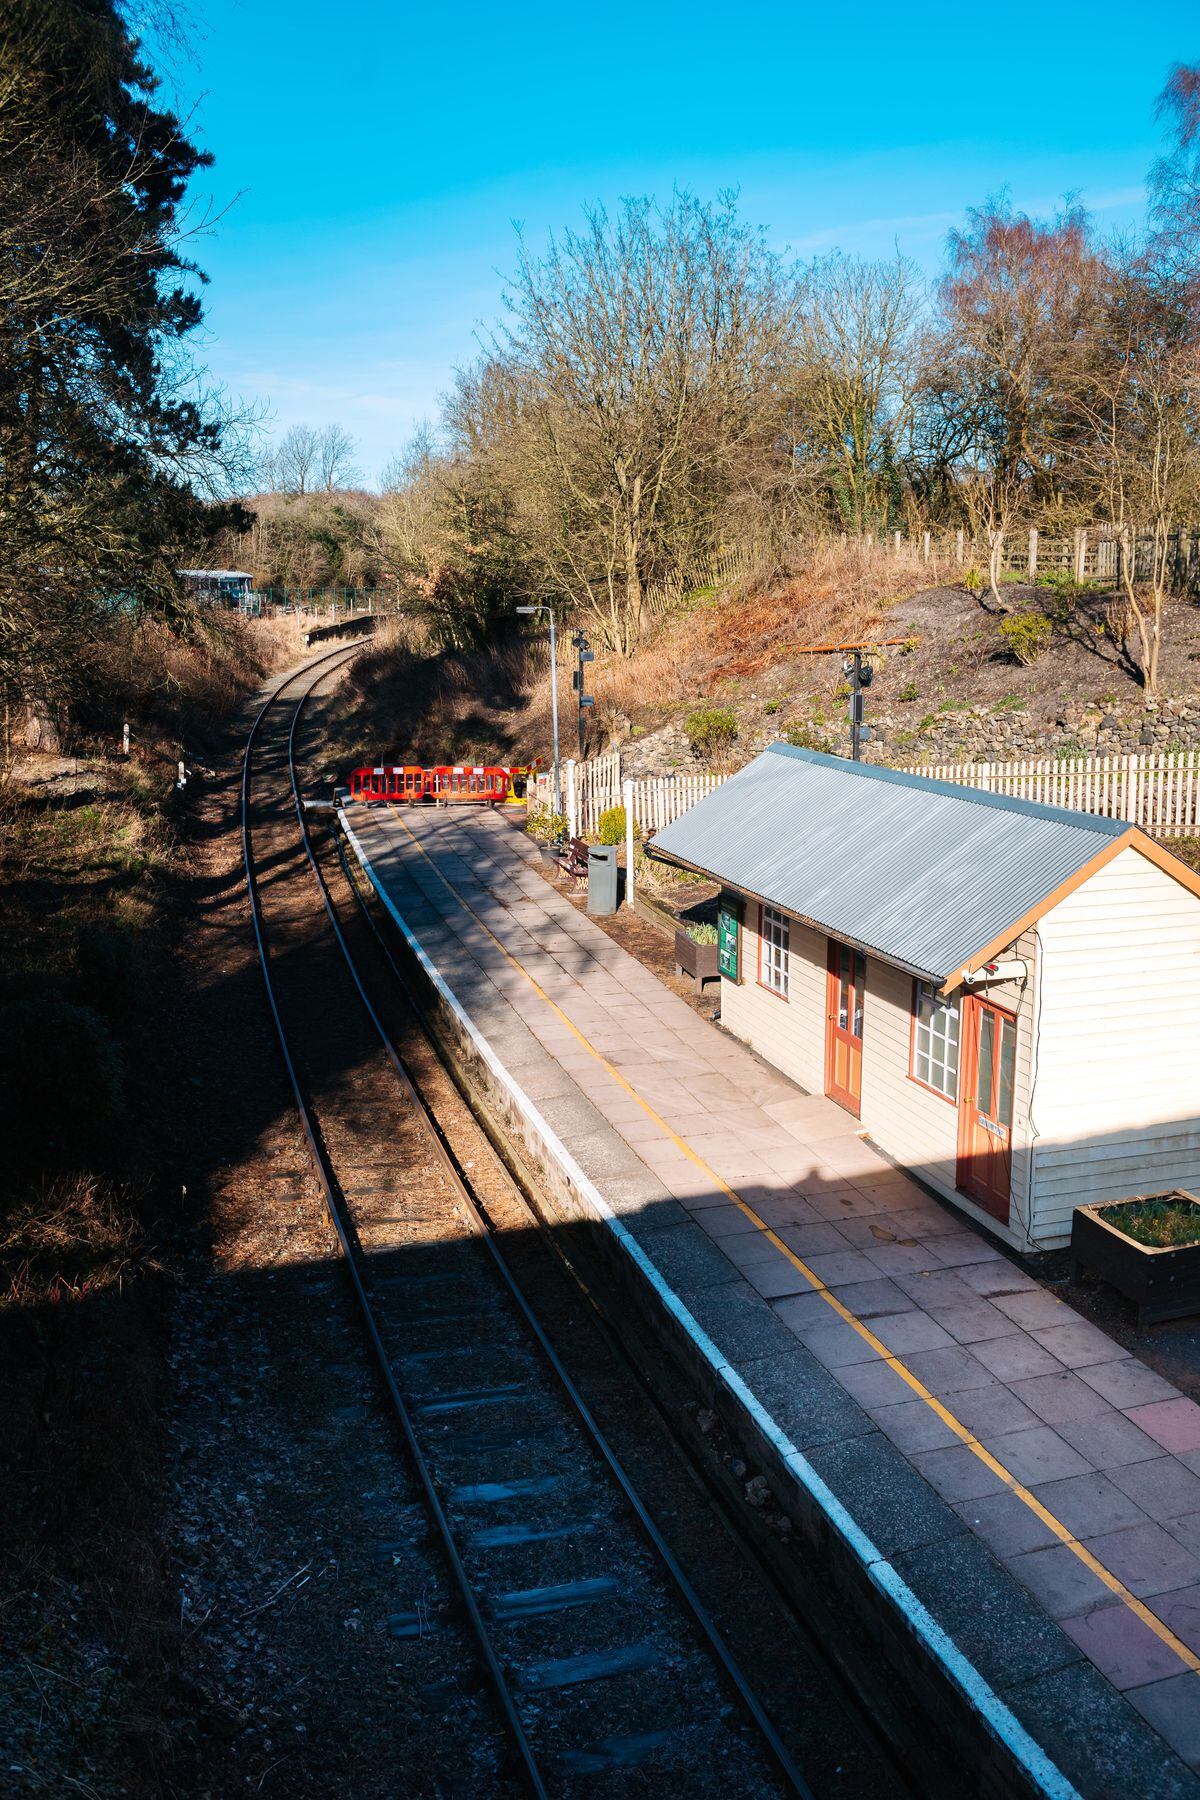 The old Horsehay & Dawley railway station, now a home base for the Telford Steam Railway